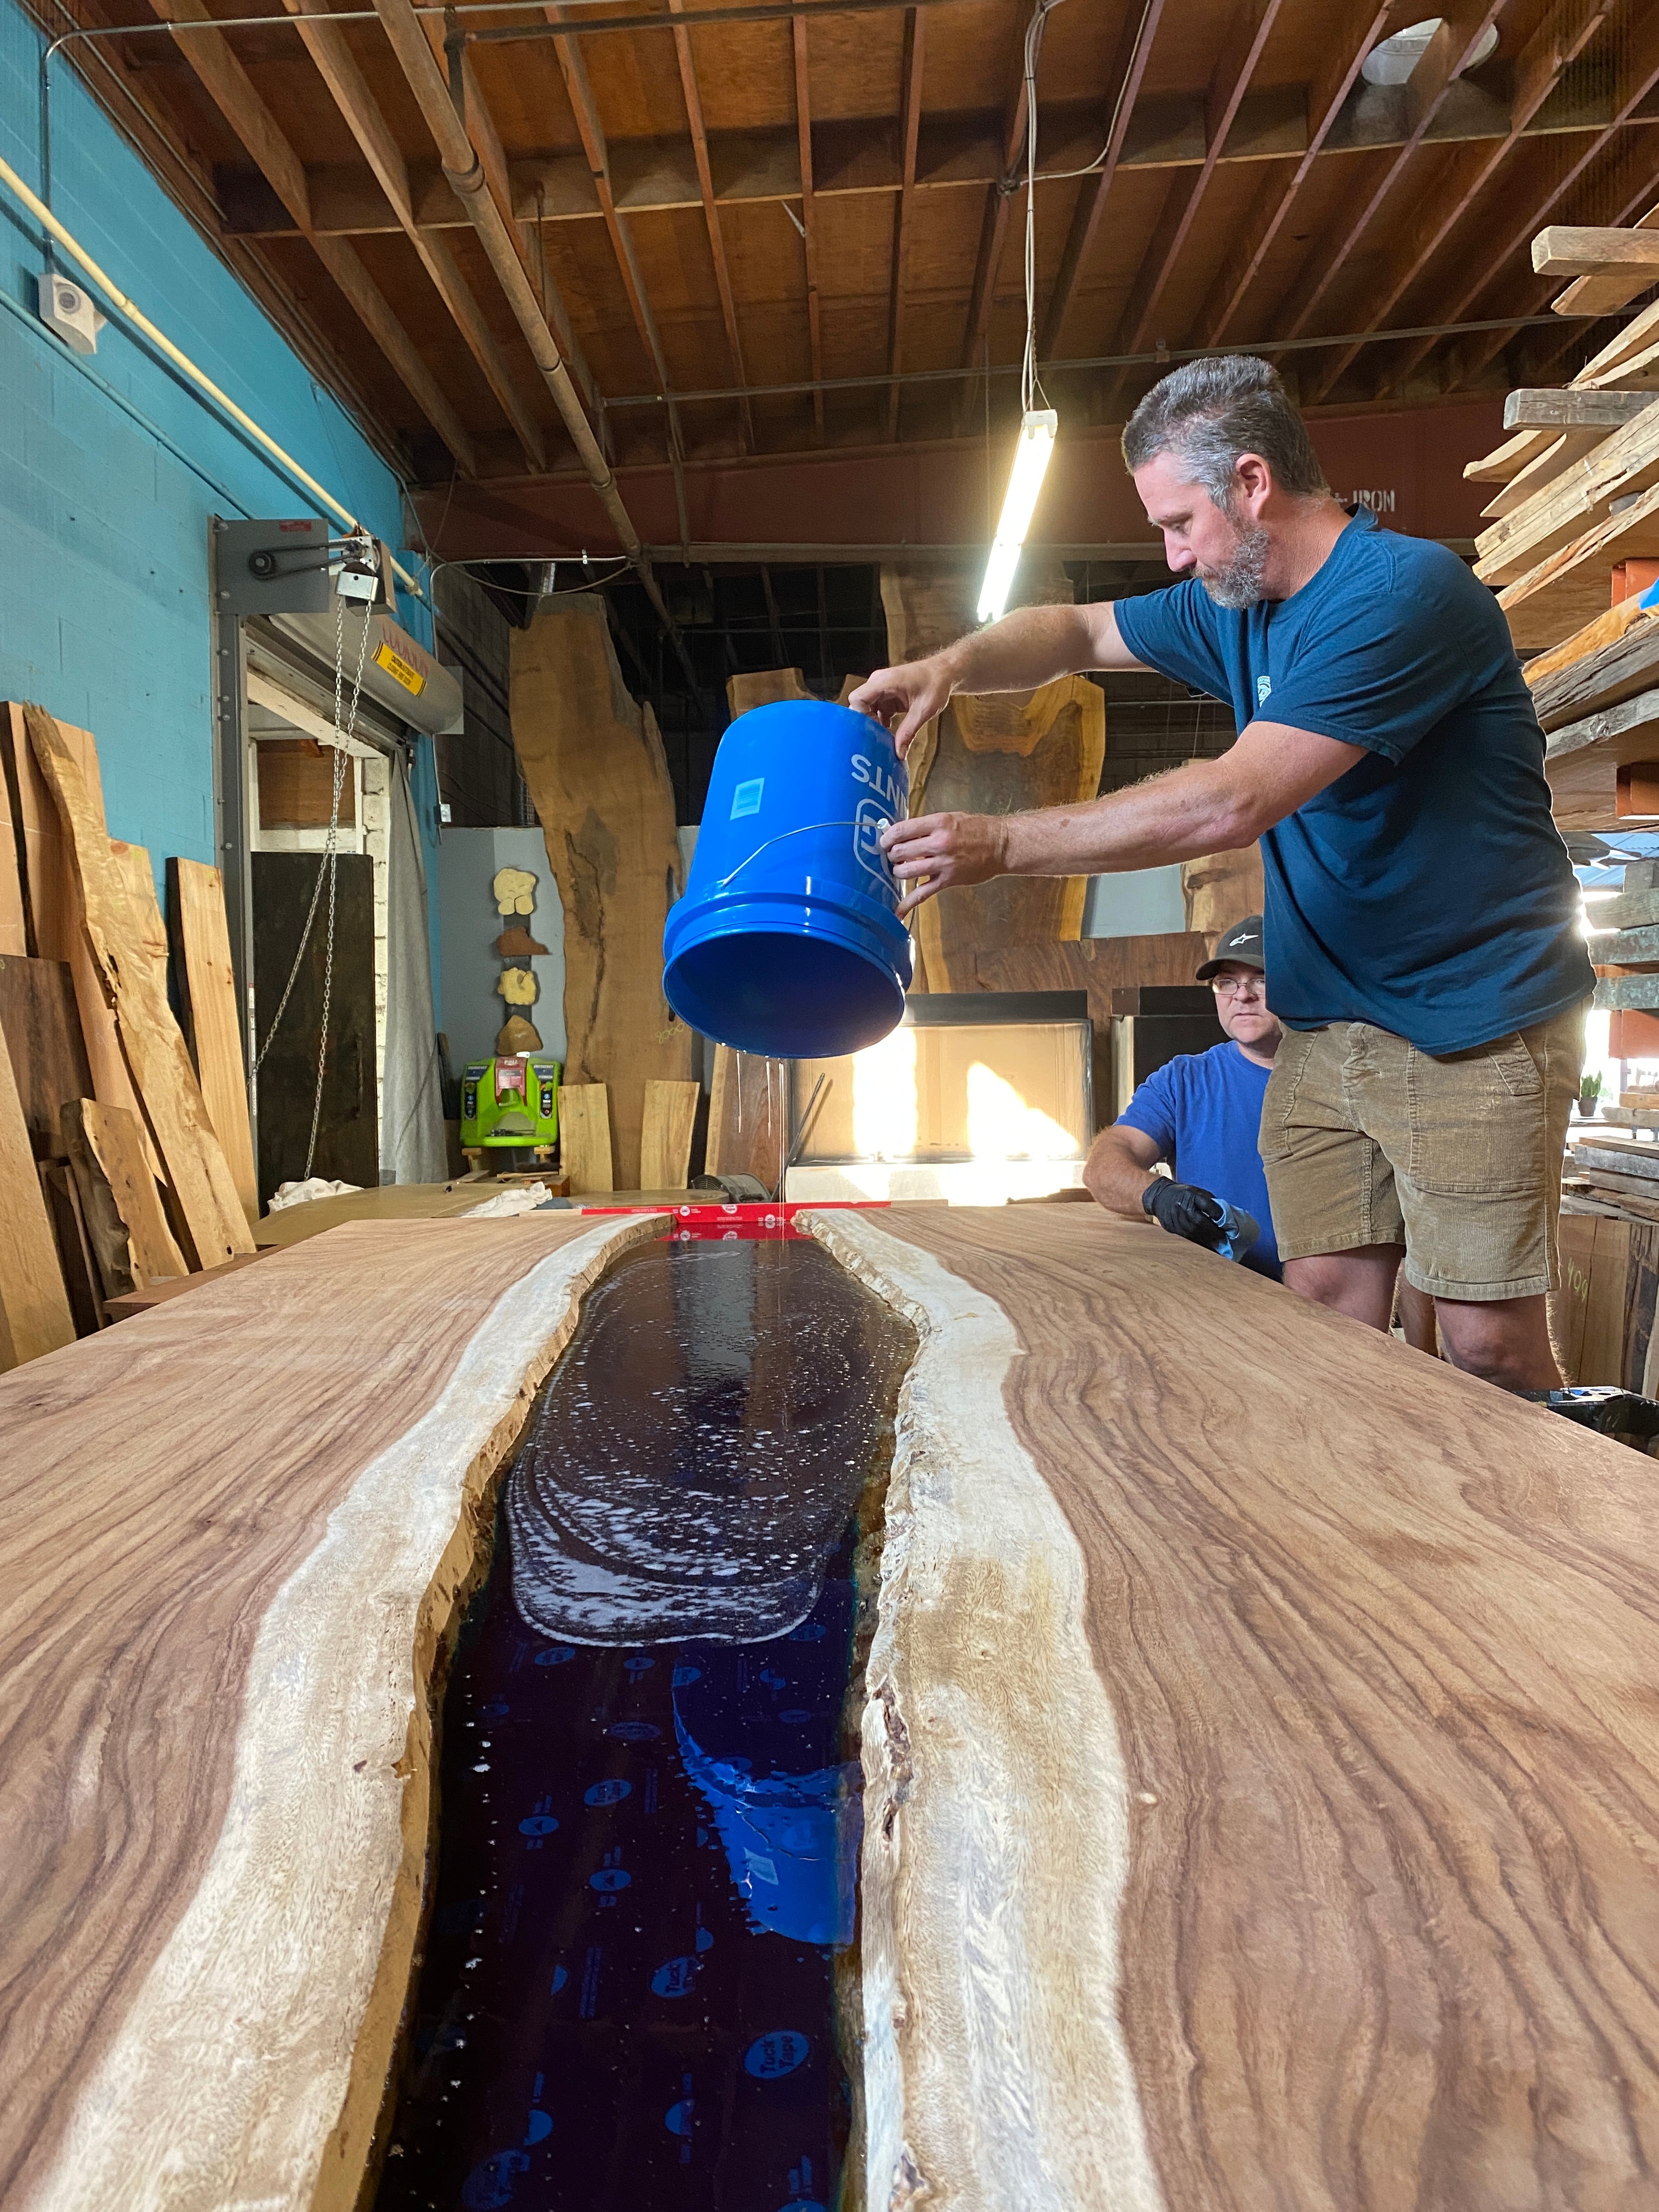 Get exclusive live edge tables in San Diego